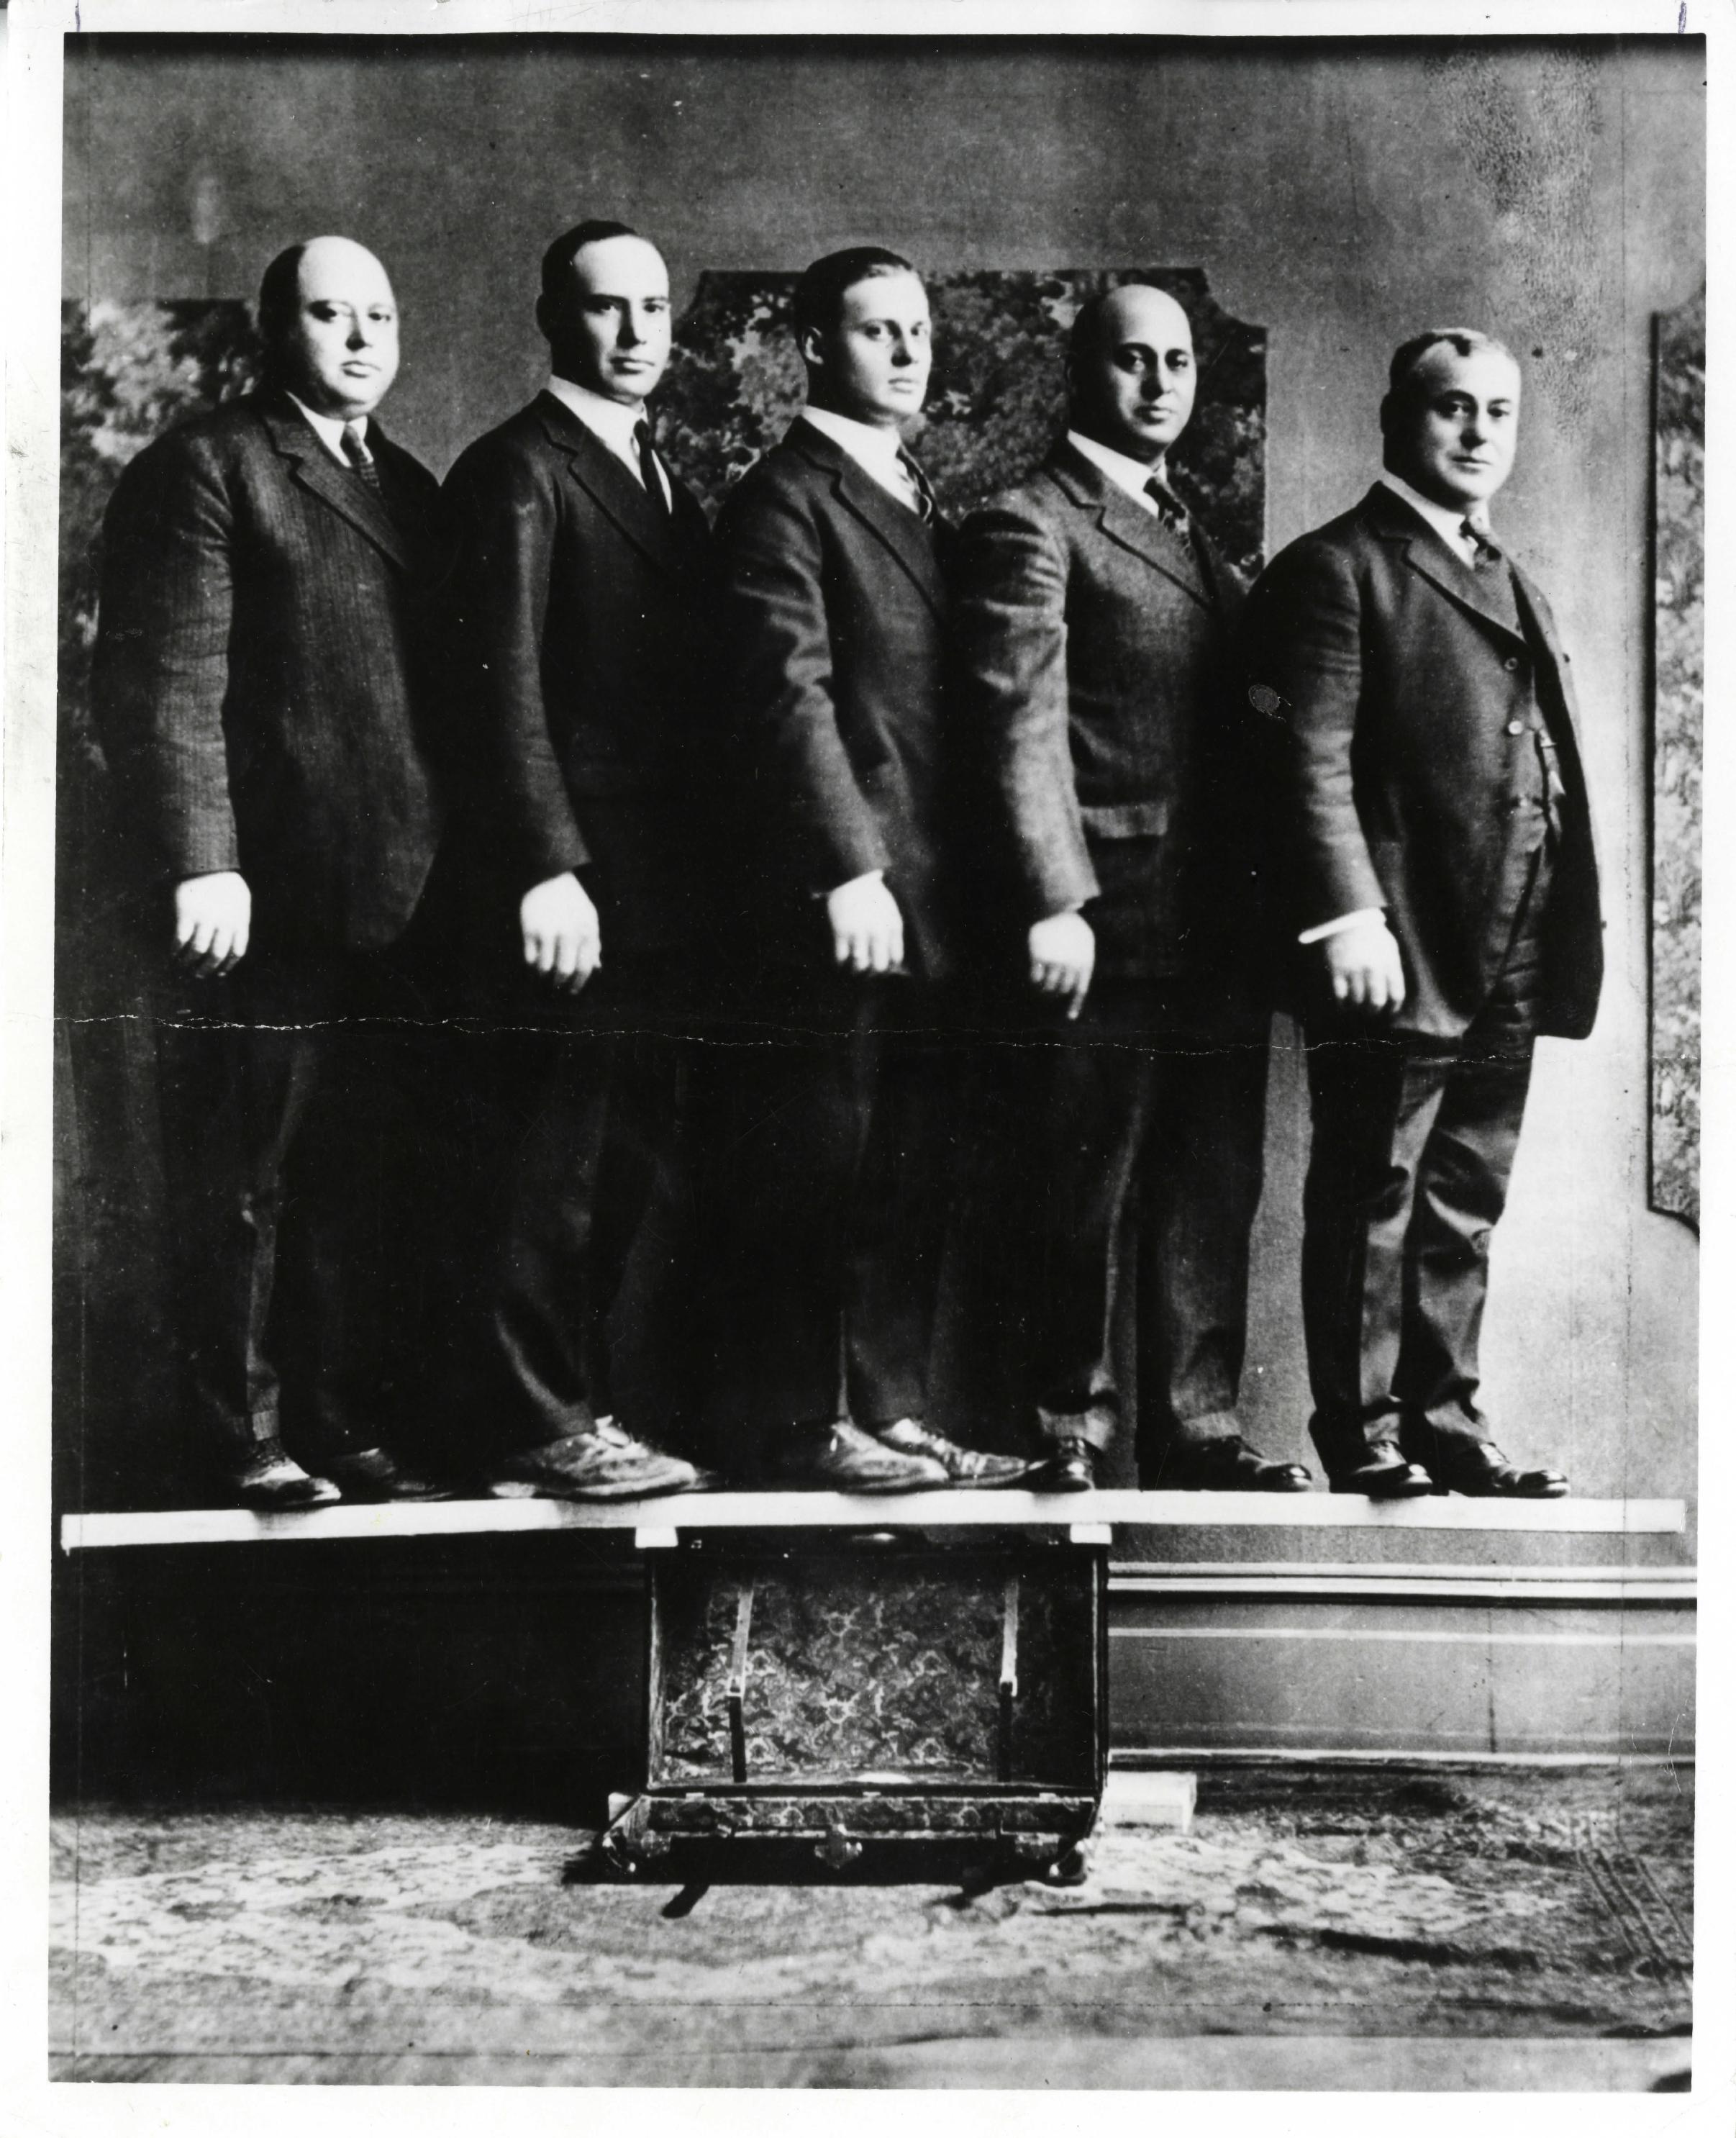 Photo of the five Shwayder brothers--Mark, Maurice, Benjamin, Jesse, and Solomon--standing on a board that is balanced on a Samsonite suitcase. This was a famous advertising image used in the early twentieth century, that the Samsonite company used to demonstrate the strength of their suitcases.